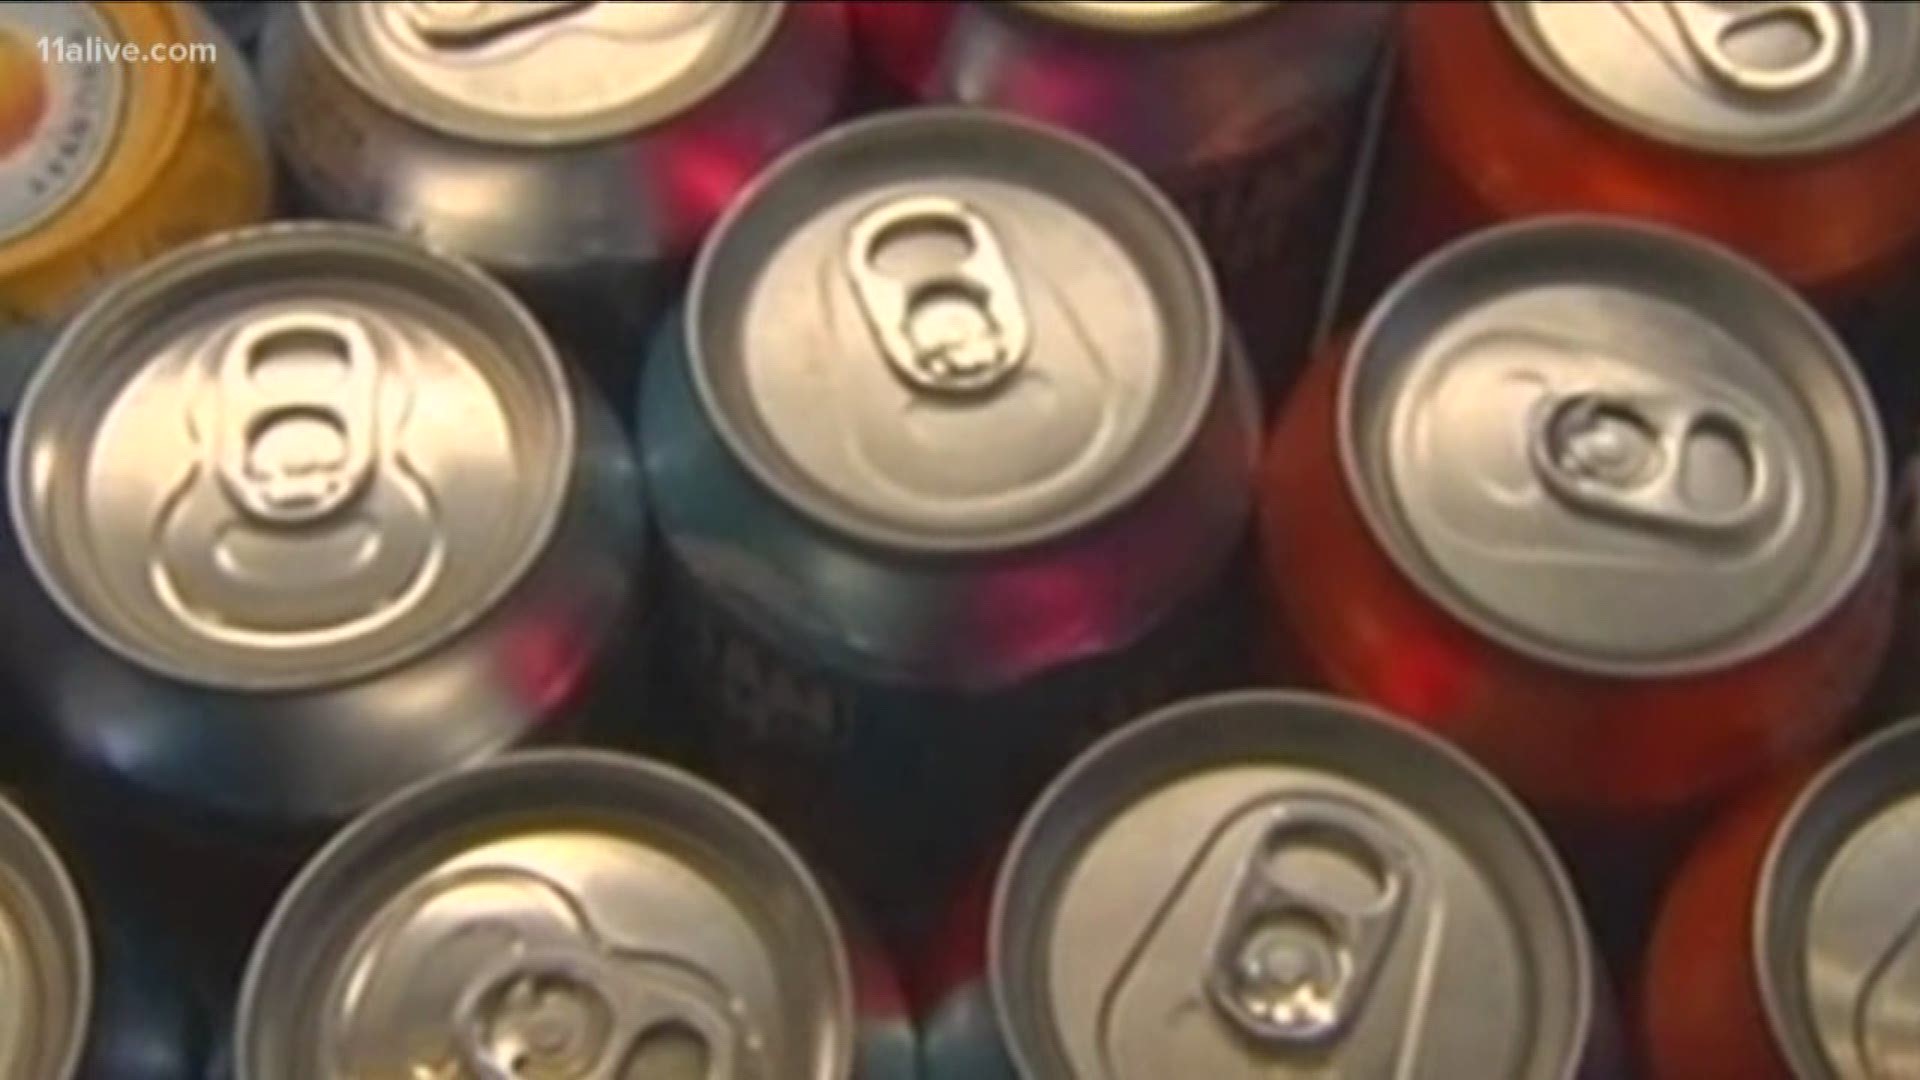 The California city of Berkeley introduced the nation's first soda tax in 2014, and within months people were buying 21 percent fewer sugary drinks, according to UPI.